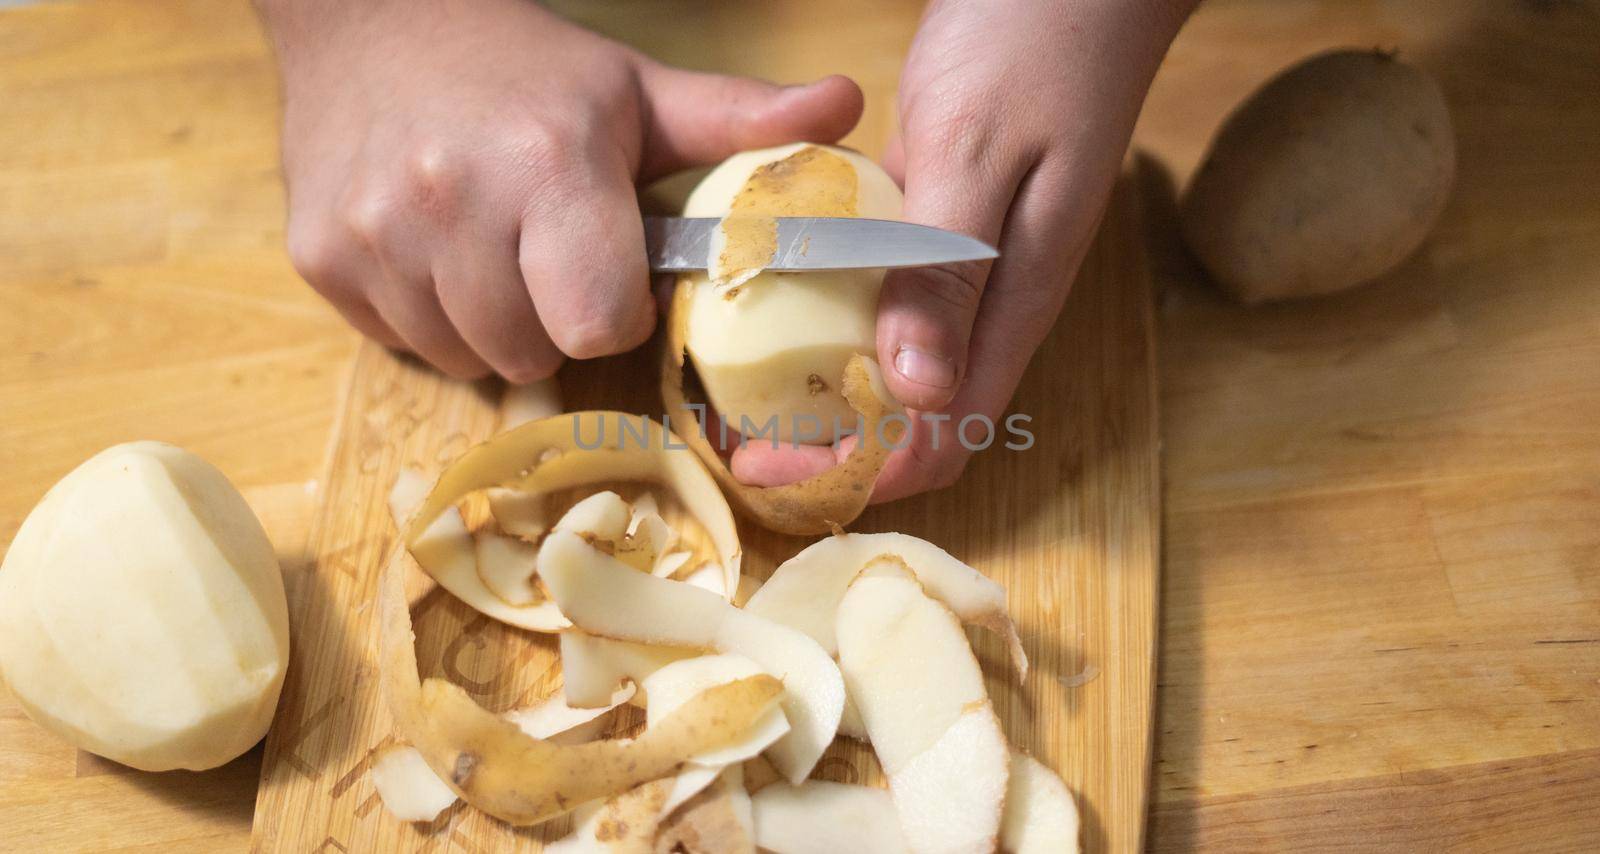 peeling a potato on a wooden table by CatPhotography